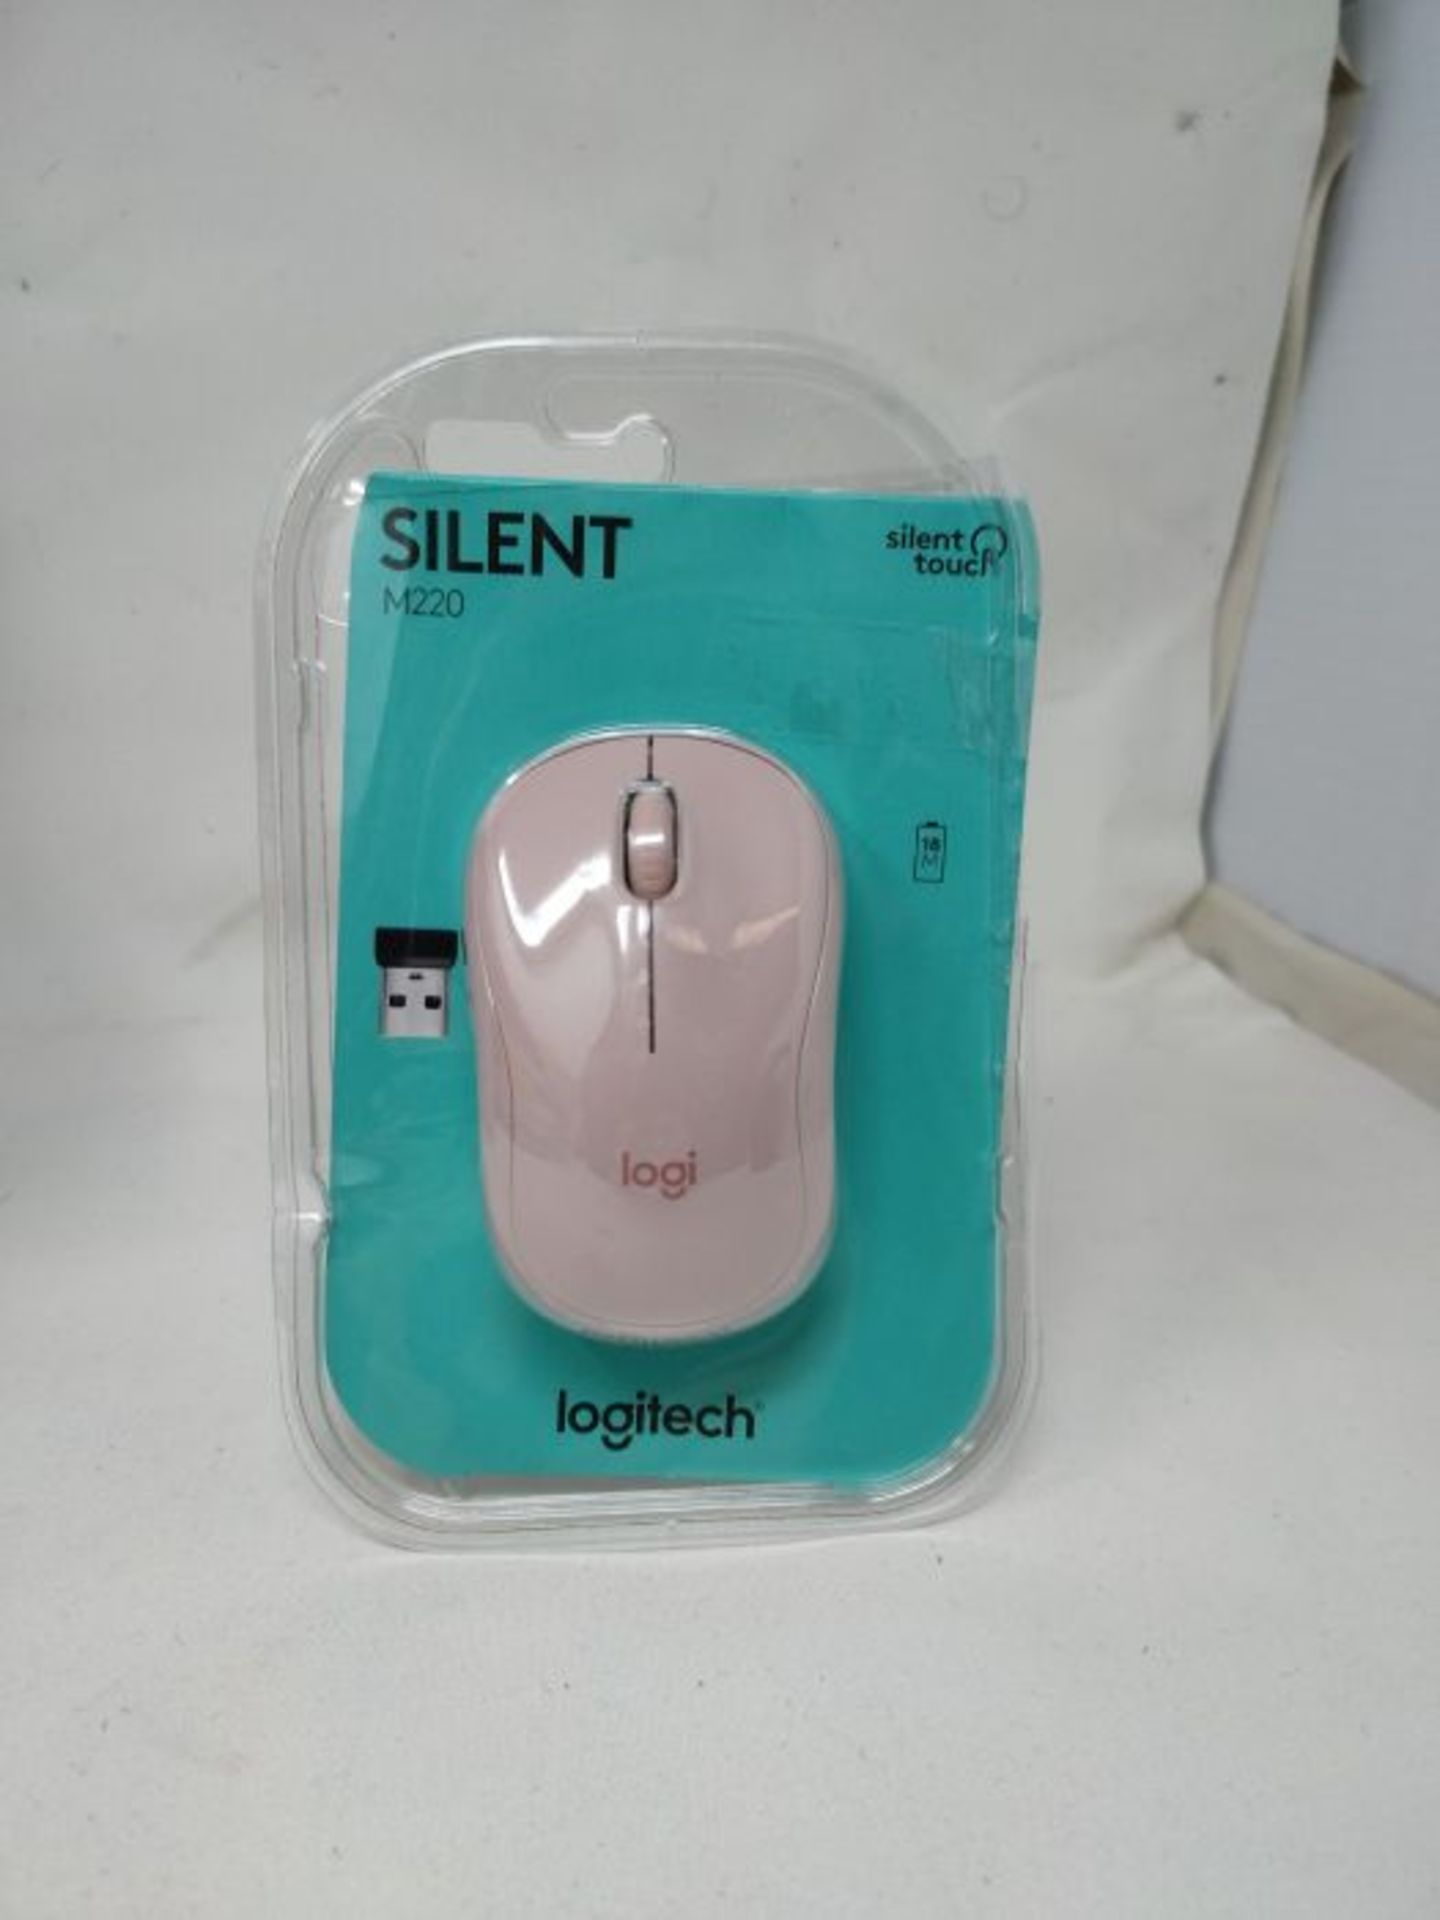 Logitech M220 SILENT Wireless Mouse, 2.4 GHz with USB Receiver, 1000 DPI Optical Track - Image 2 of 3